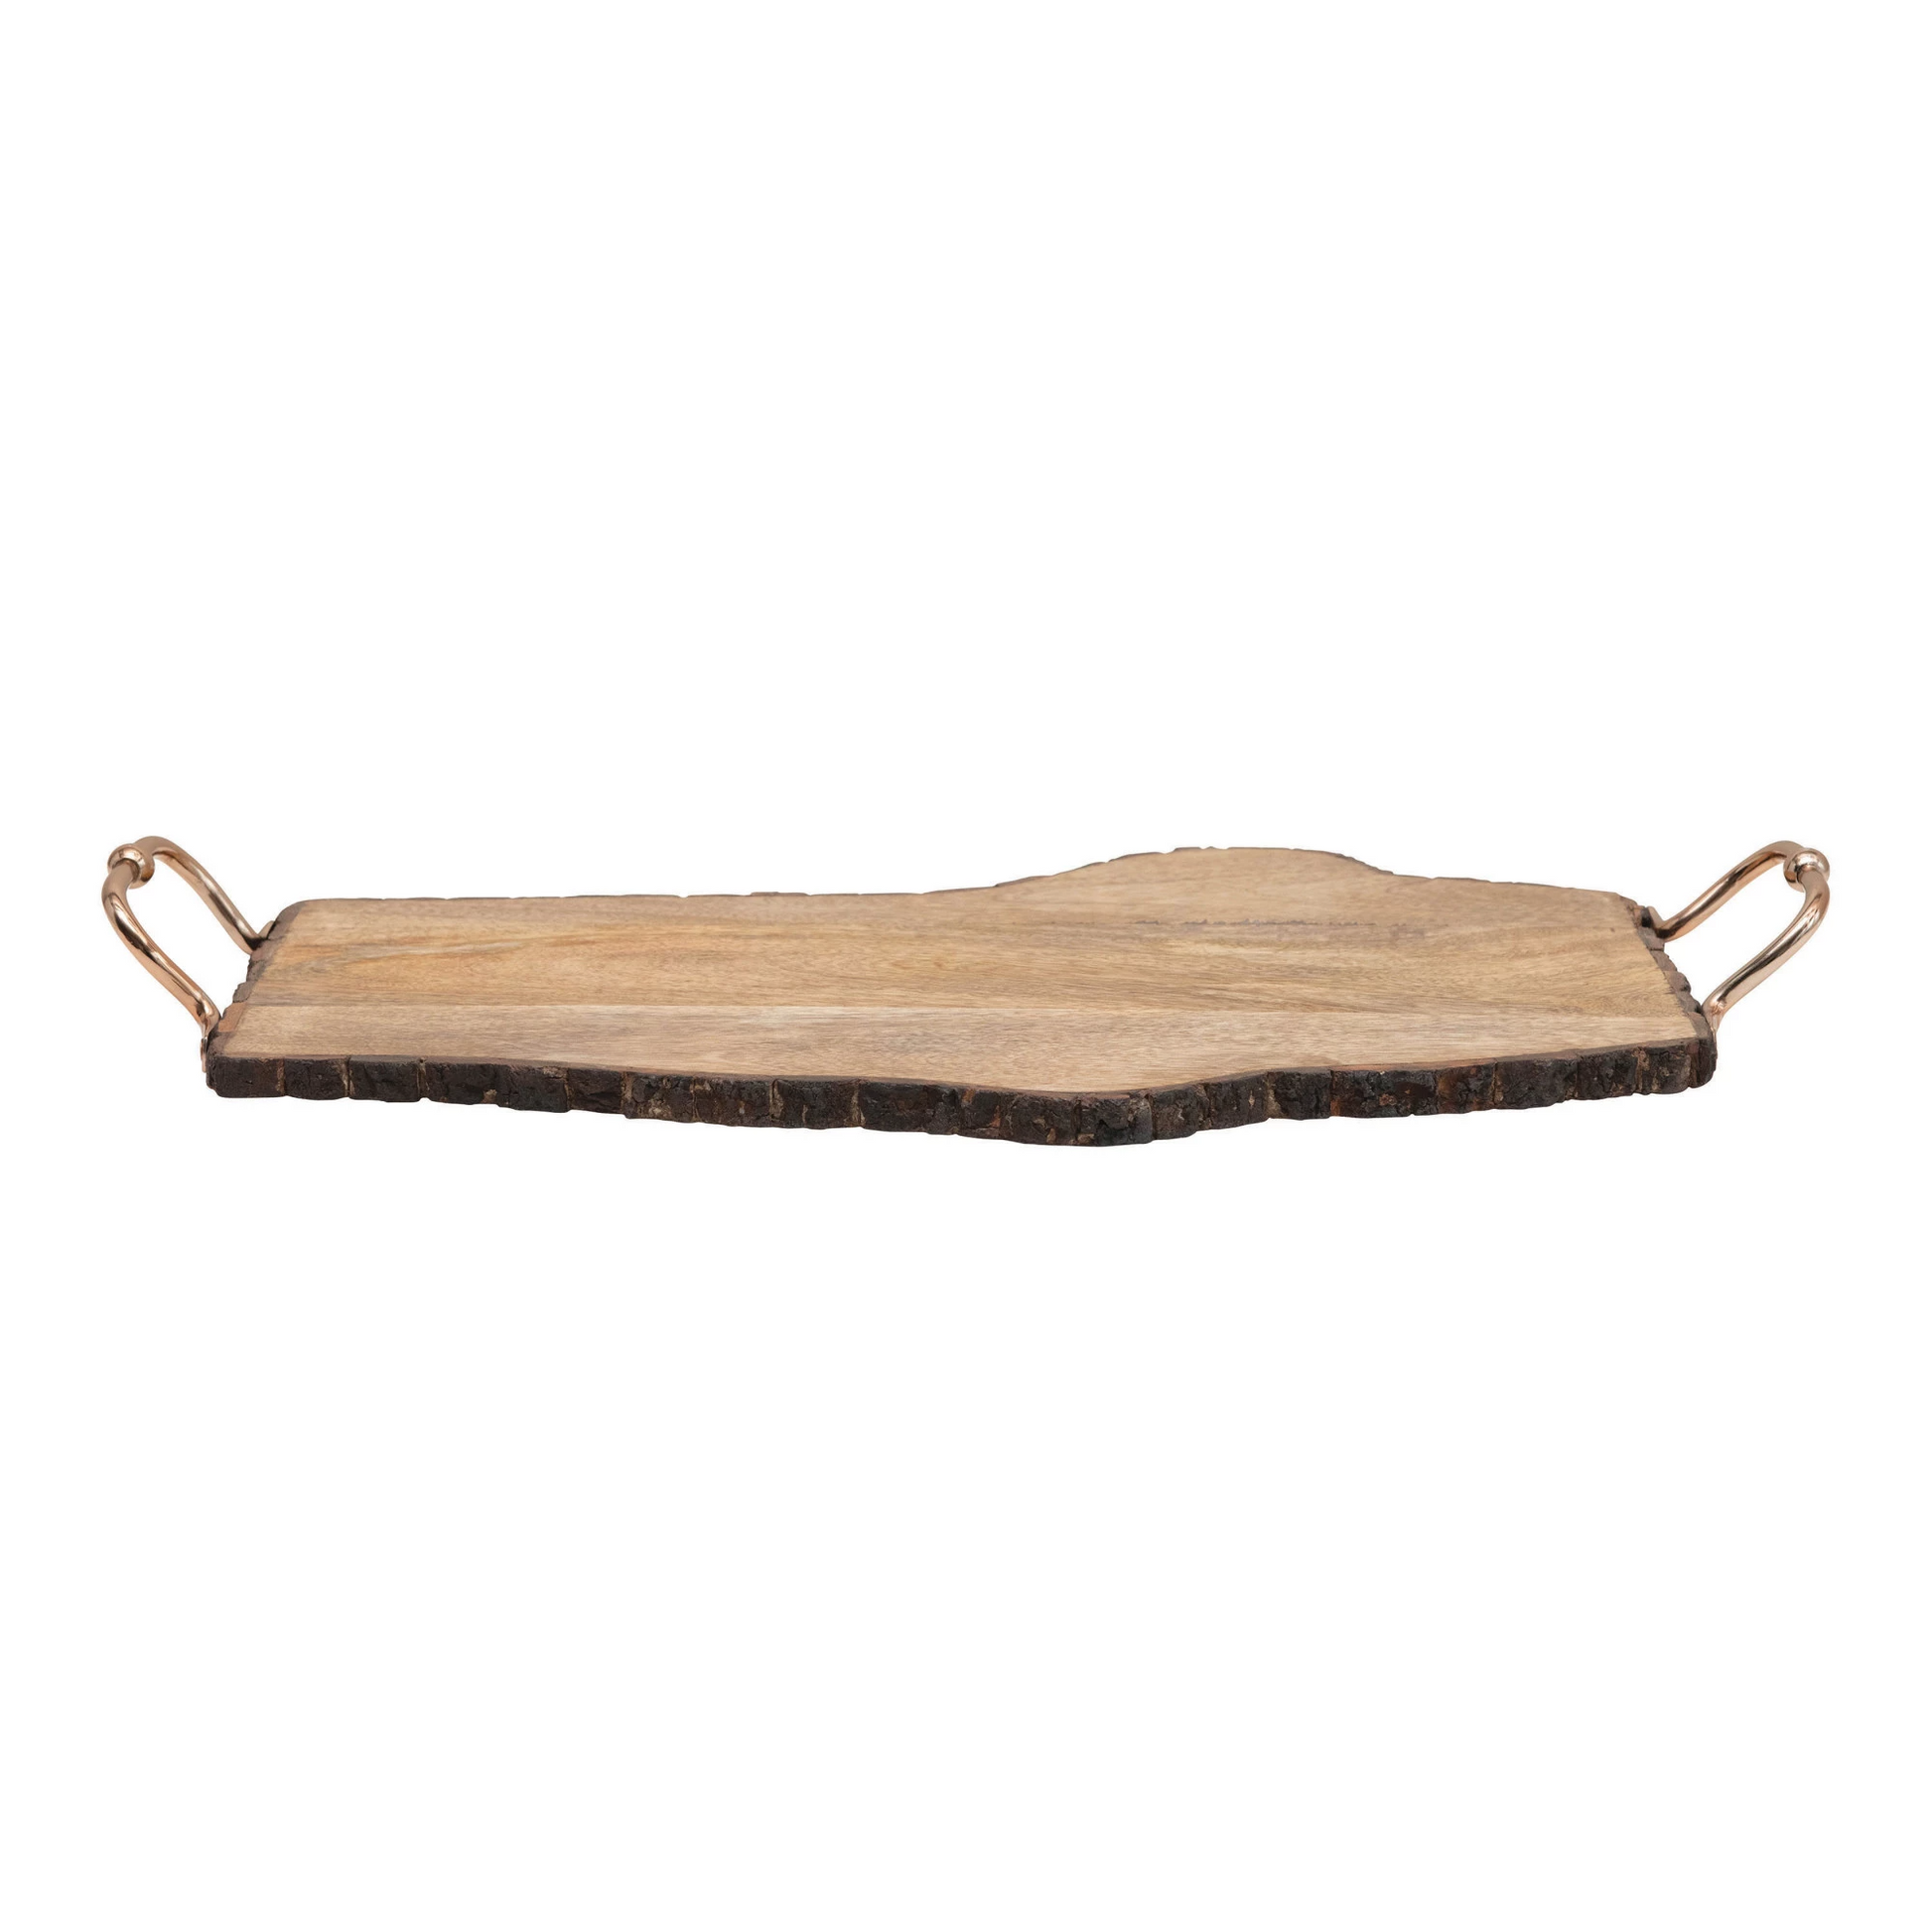 Live Edge Wood Slab Serving Tray with Copper Finish Handles - 24-in - Mellow Monkey